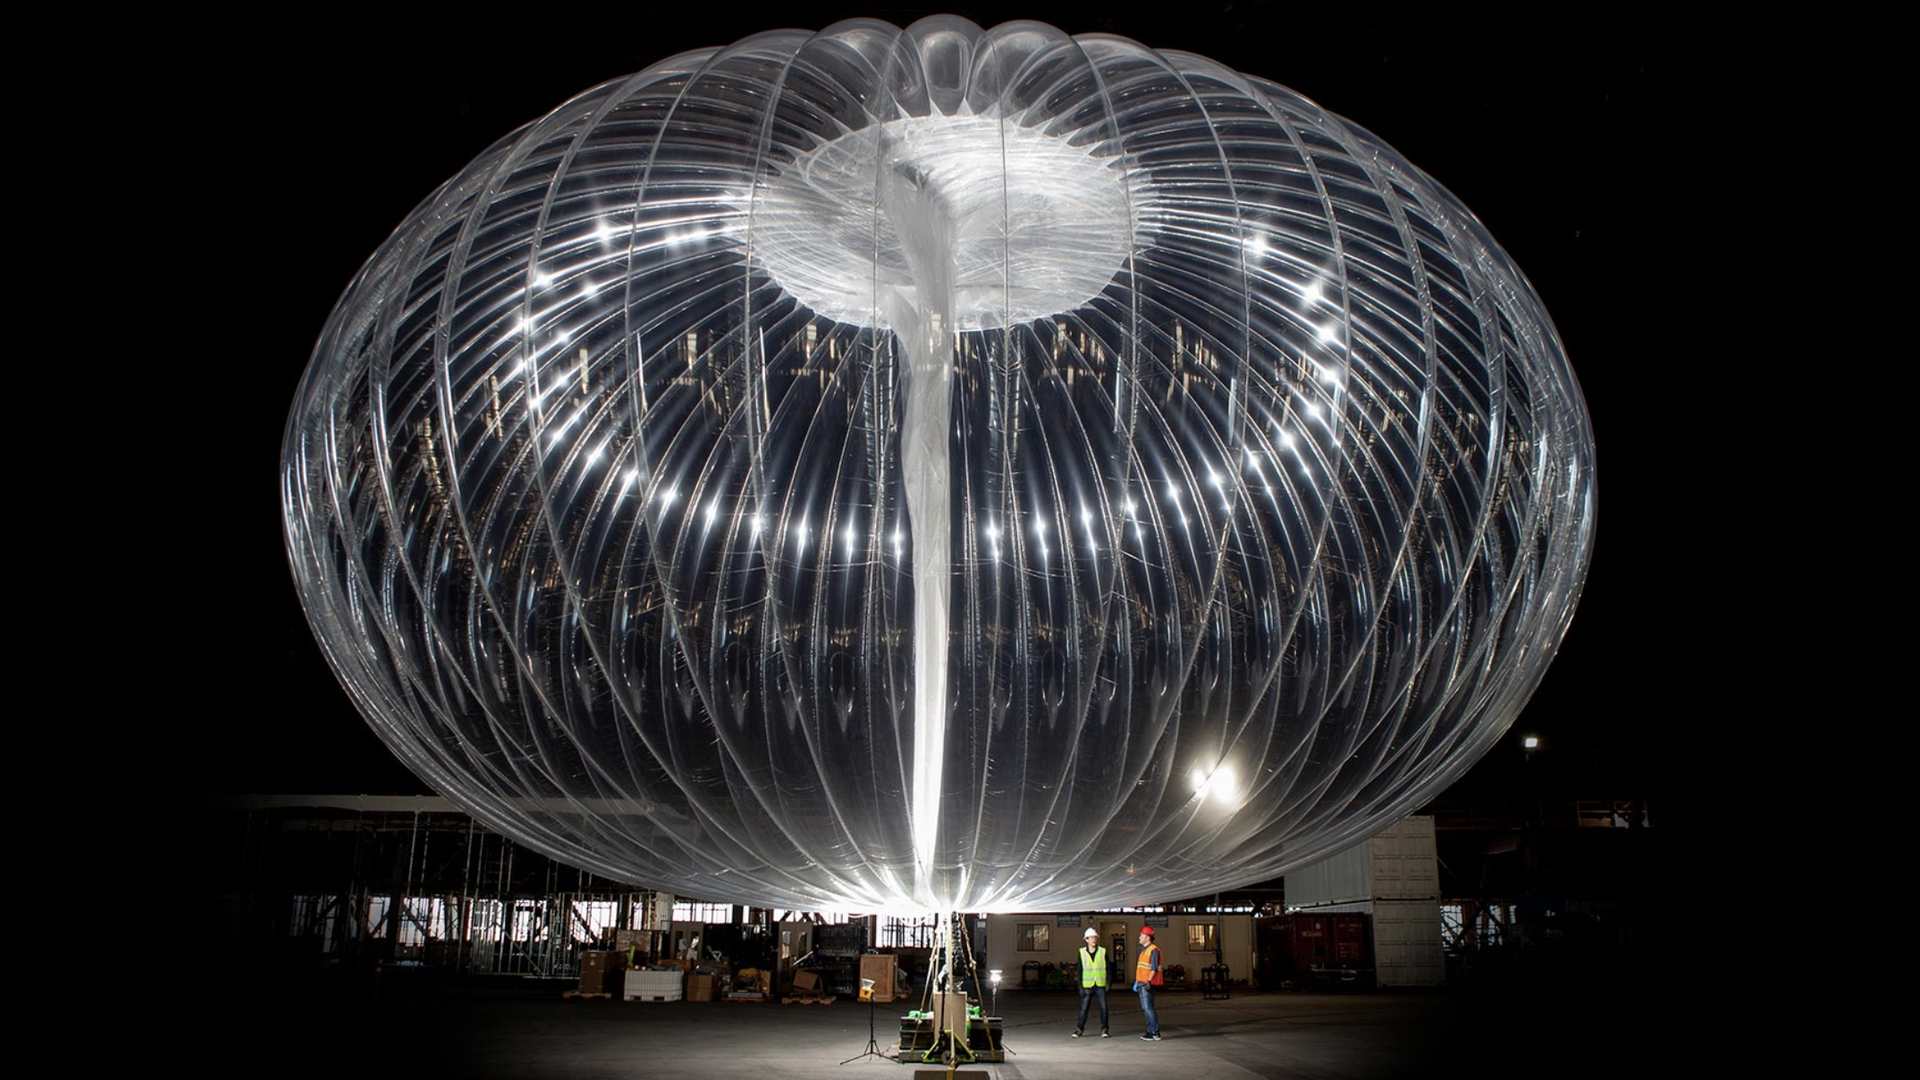 An image of one of Alphabet's Project Loon internet delivery balloons